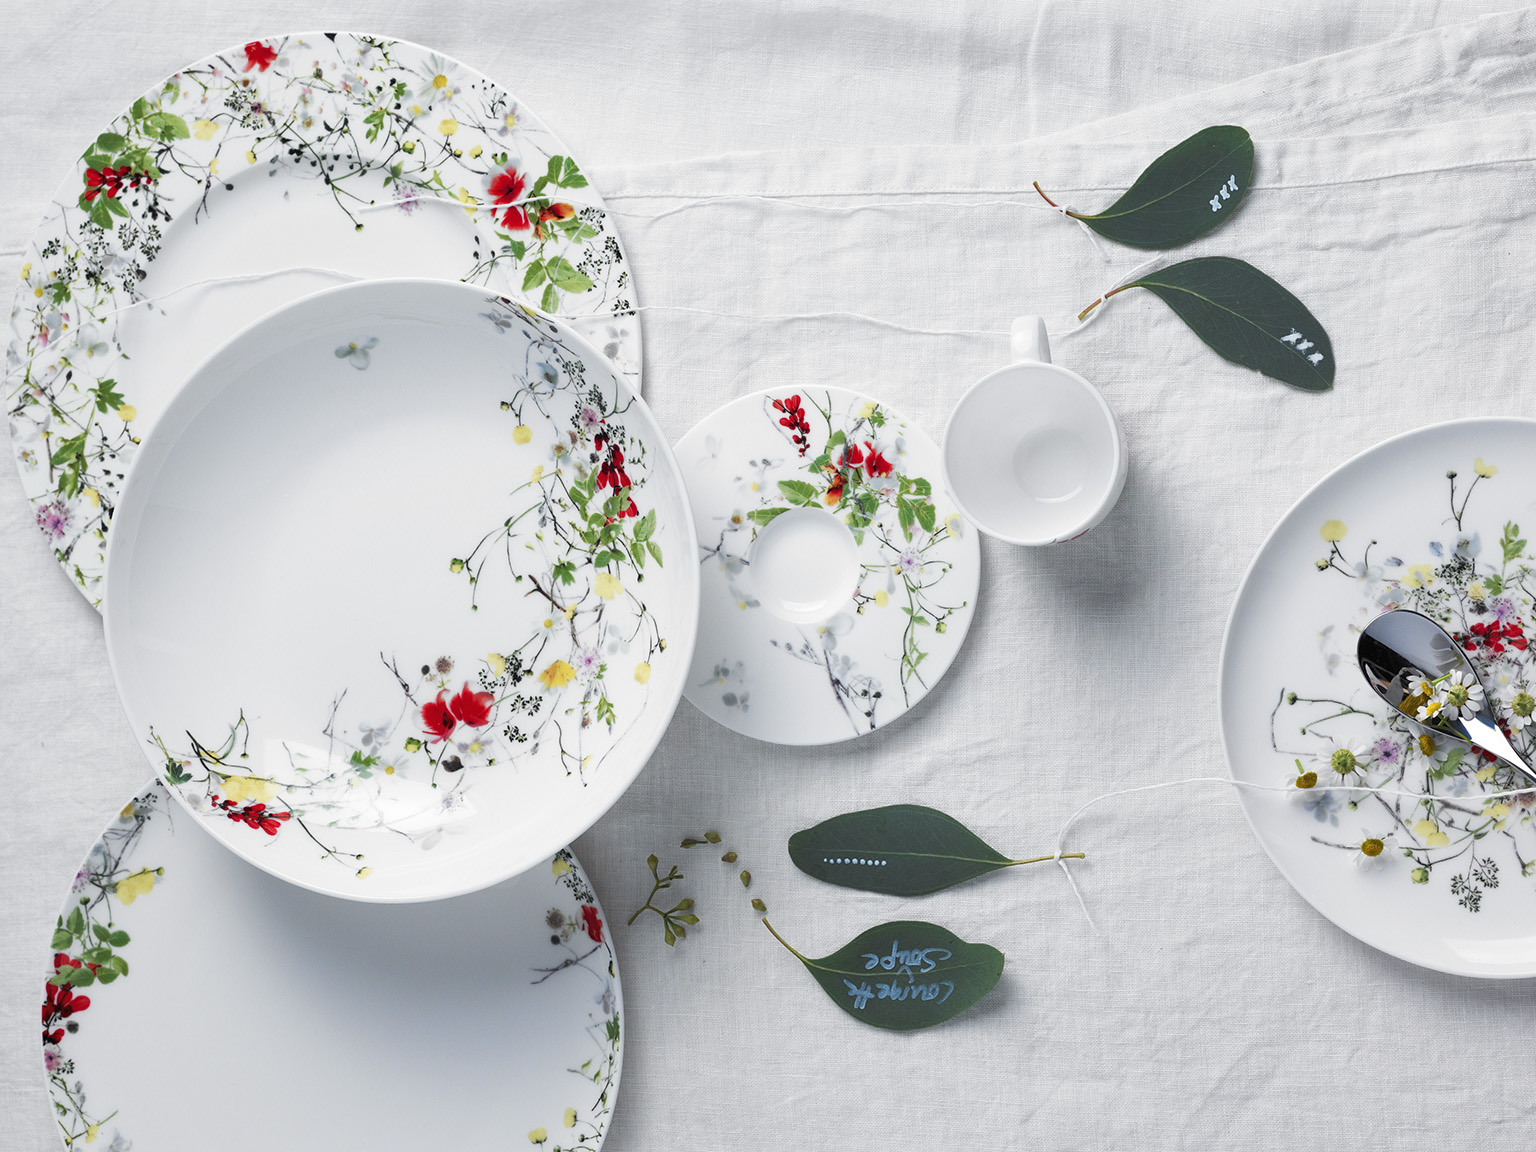 Rosenthal Brillance Fleurs Sauvages plates from above